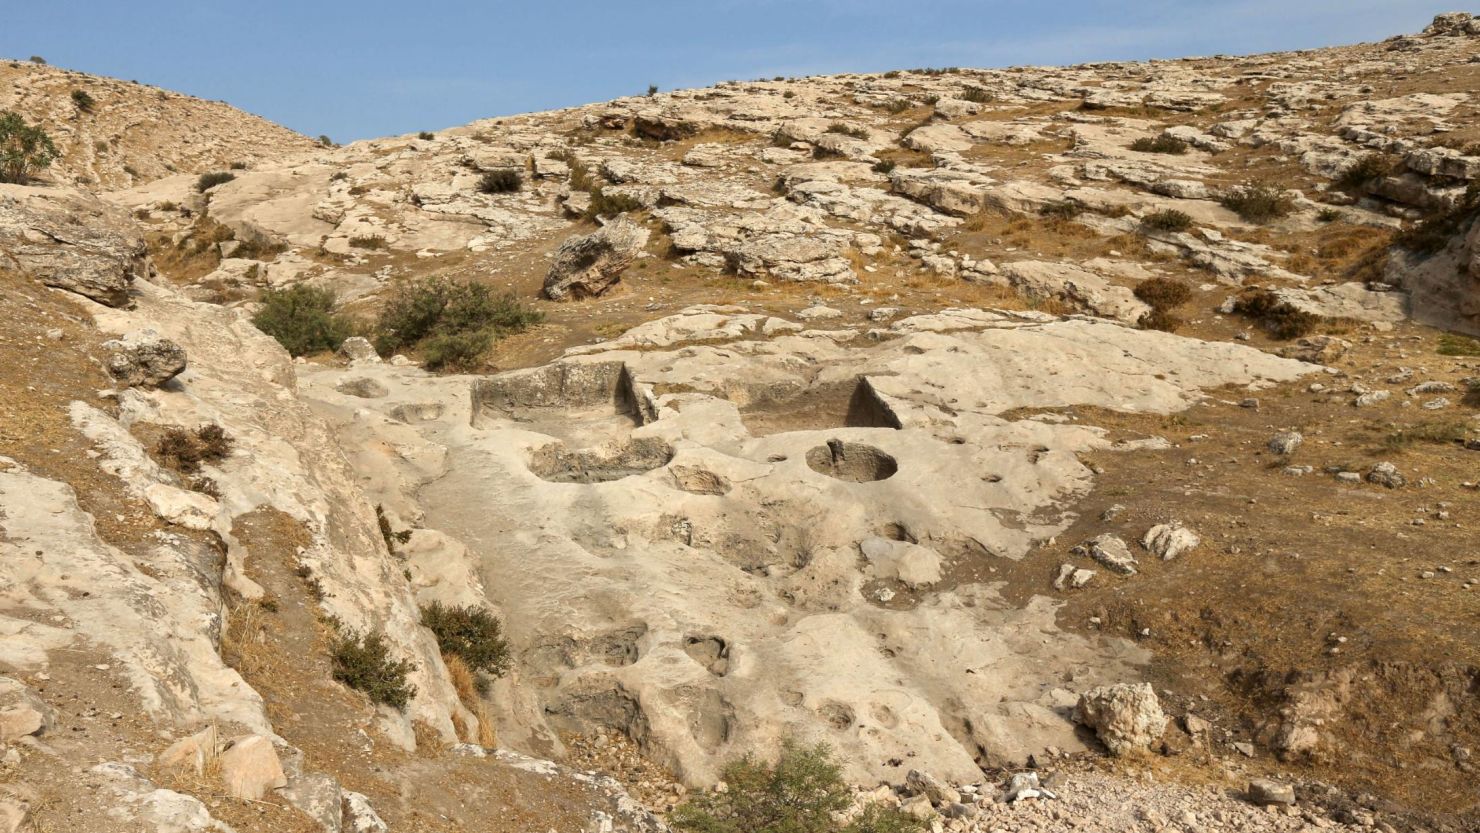 A view shows 2,700-year-old winery discovered by archaeologists, in Duhok, Iraq October 28, 2021. Picture taken October 28, 2021. REUTERS/Ari Jalal